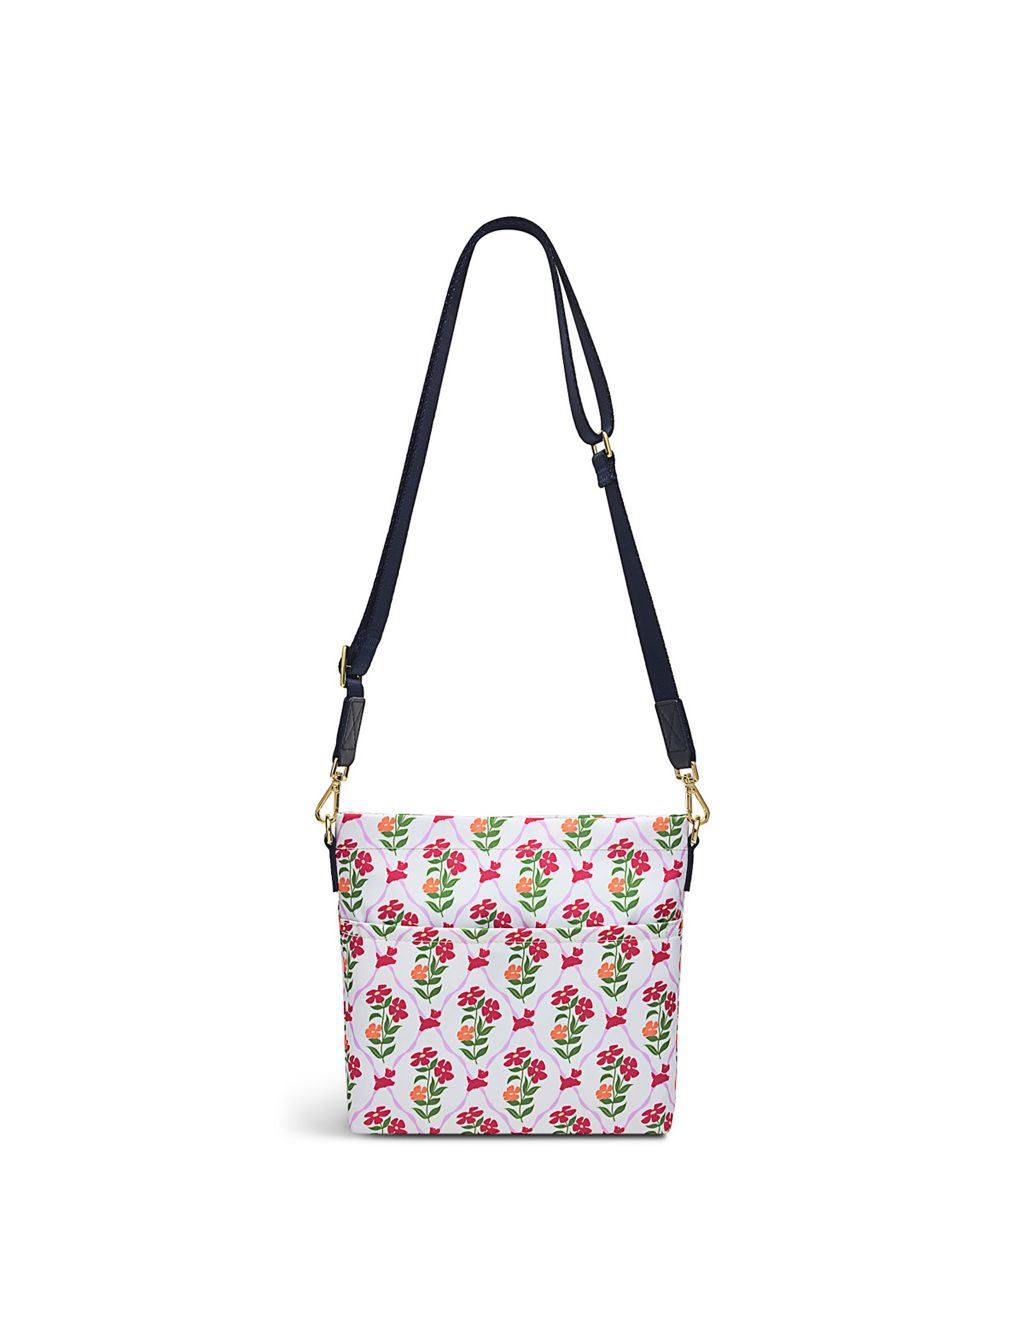 Finsbury Park Floral Cross Body Bag 2 of 5